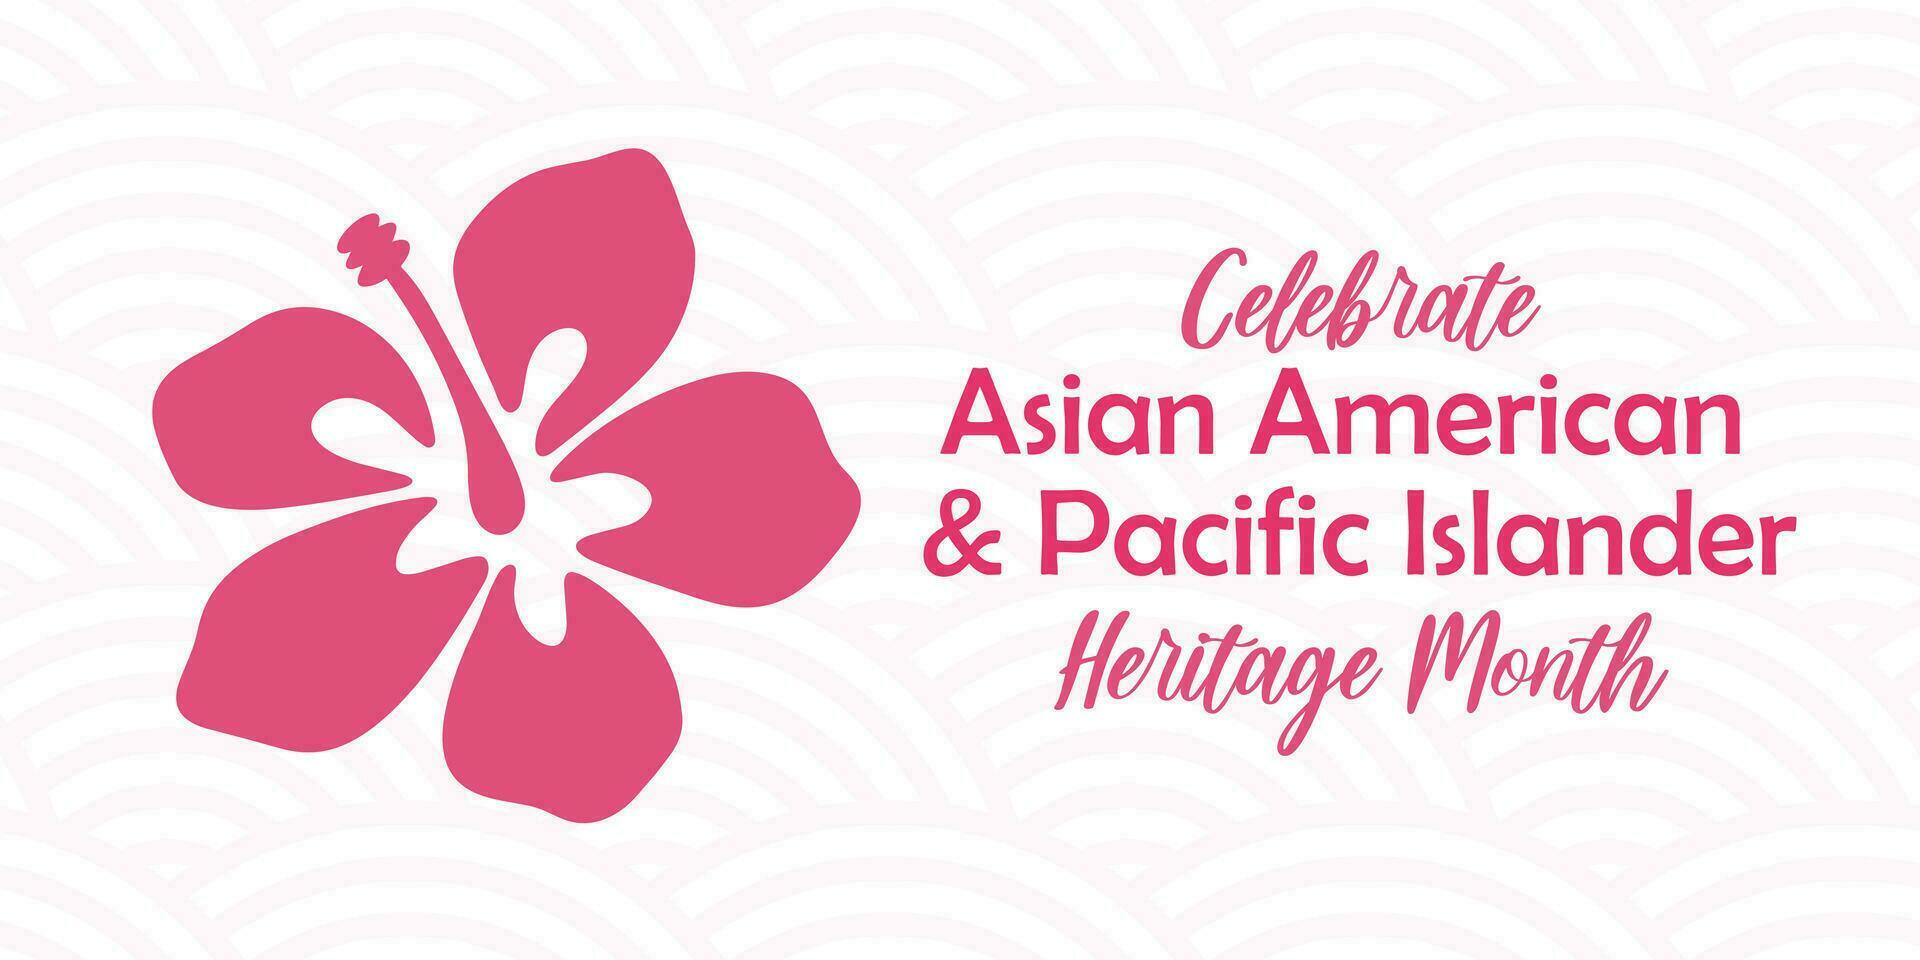 Asian American, Pacific Islander Heritage month vector banner with tropical hibiscus icon, hand drawn hawaiian flower silhouette. Greeting card, AAPI print